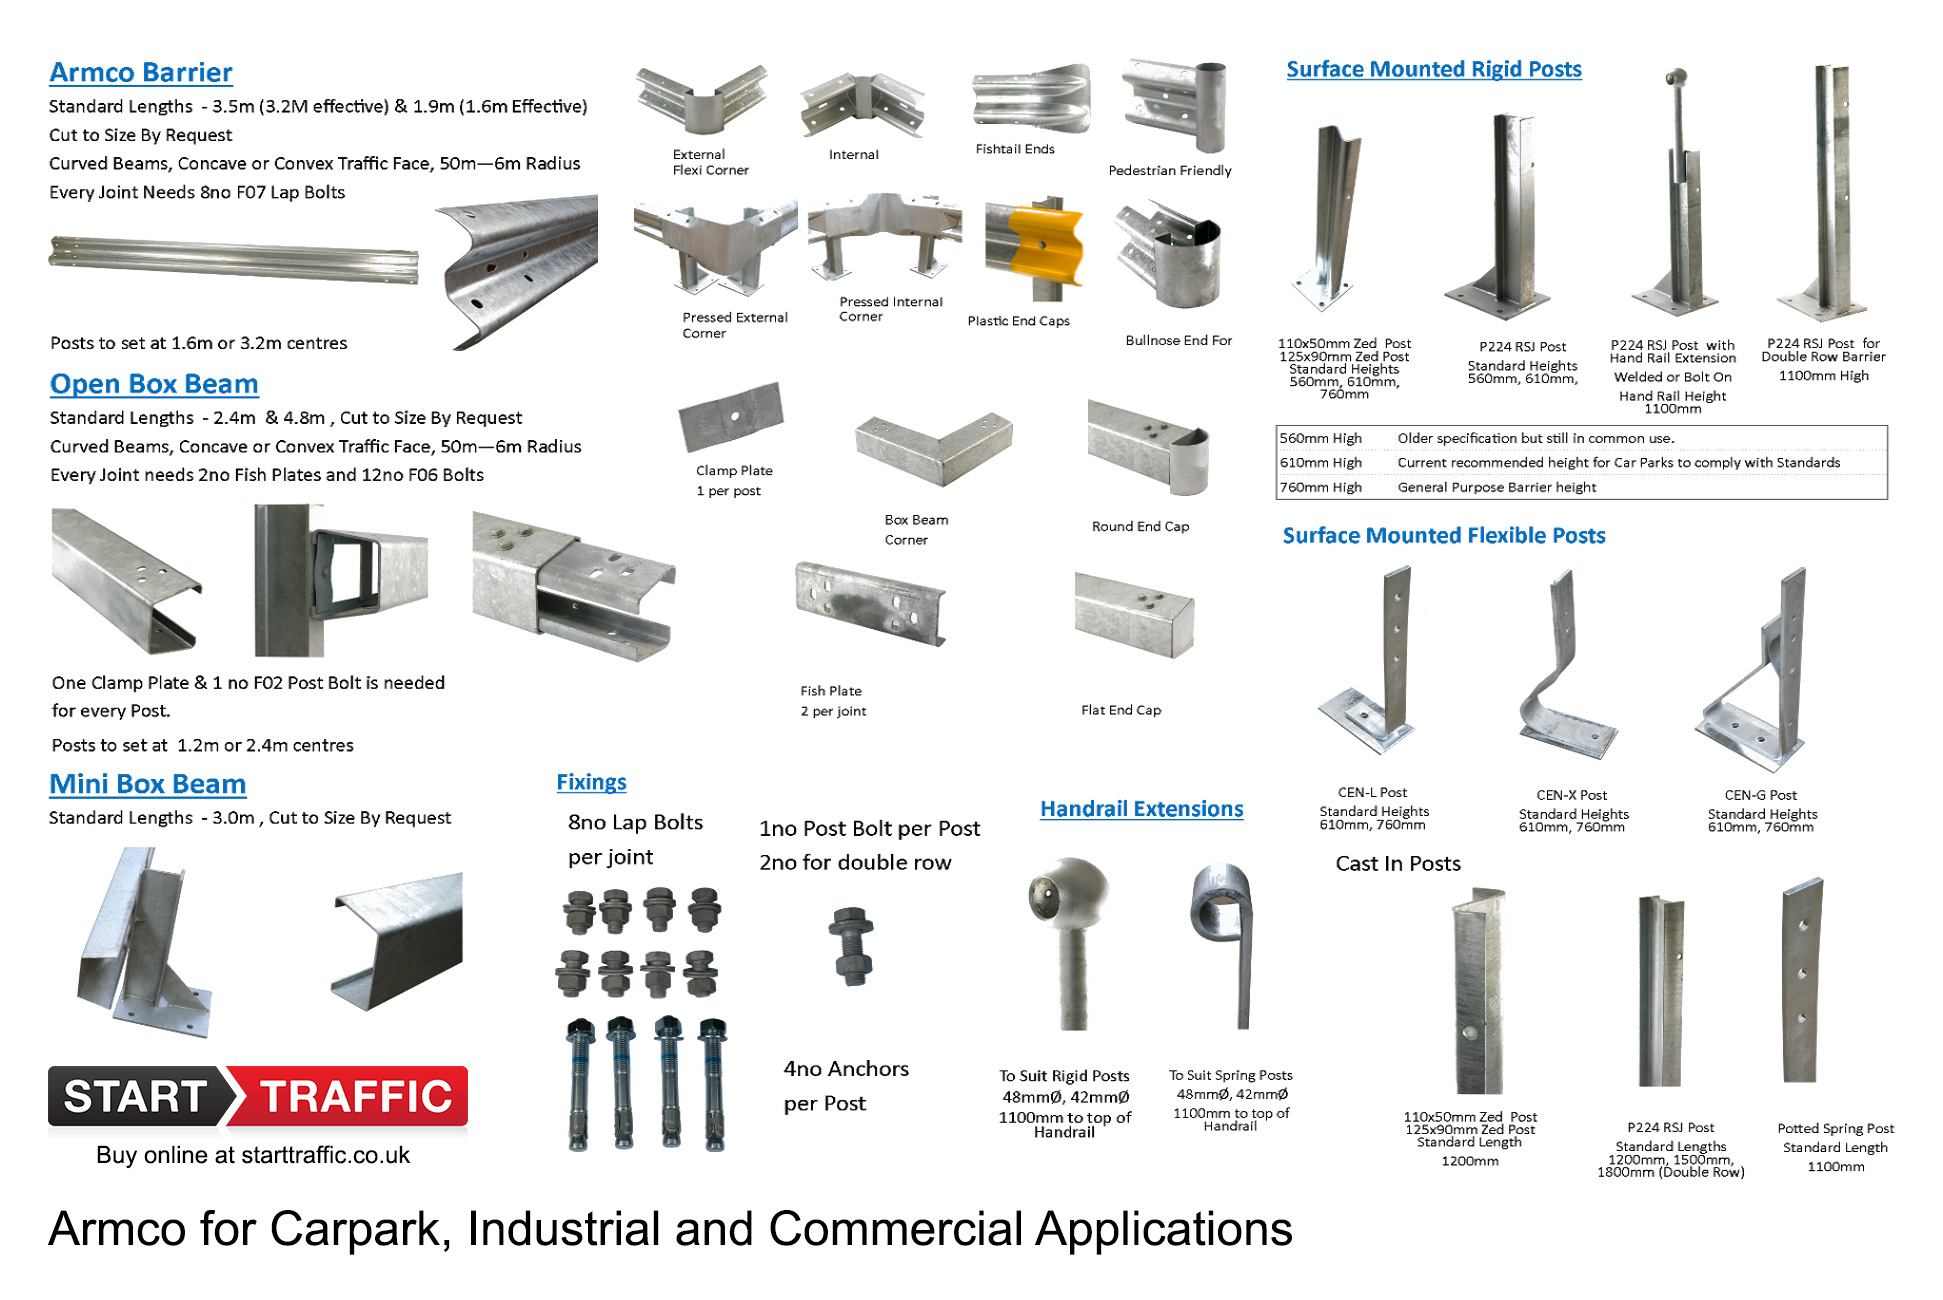 The Full Armco Range of Products